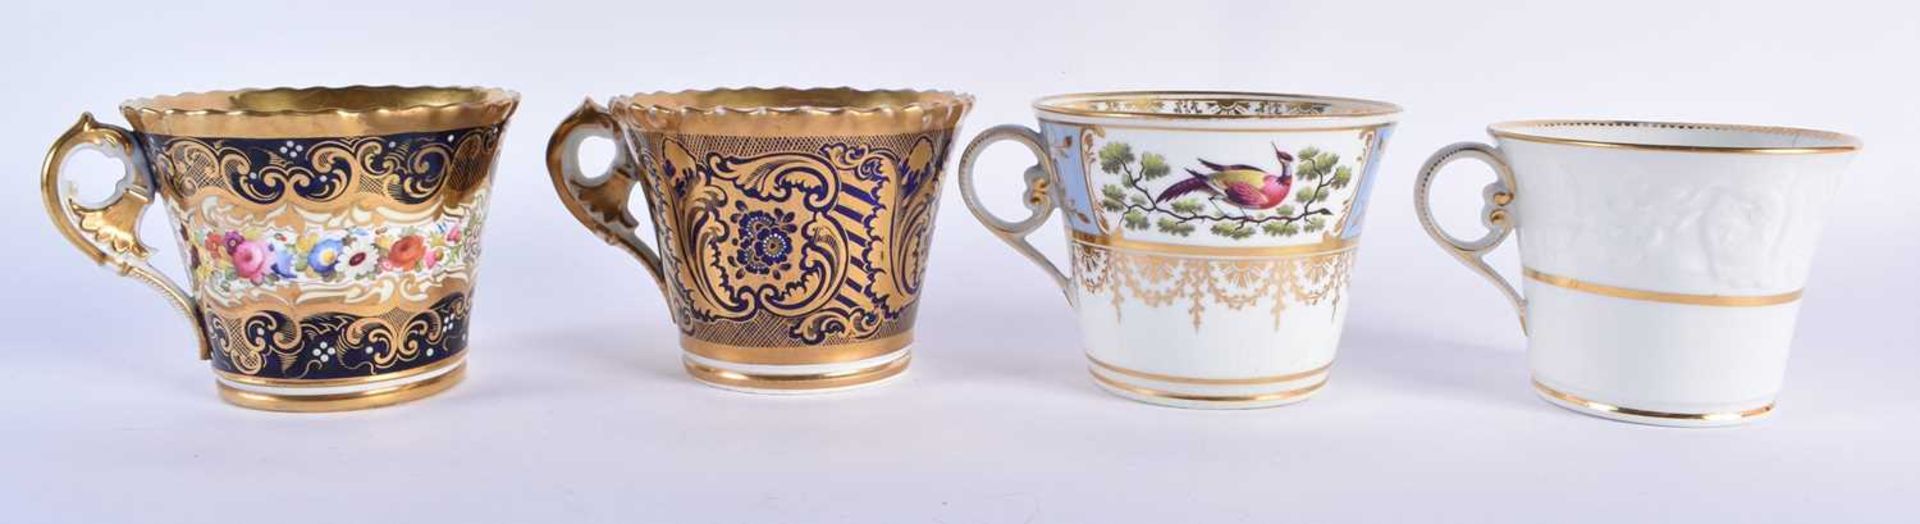 FOUR EARLY 19TH CENTURY LARGE CHAMBERLAINS WORCESTER COFFEE CUPS of varying designs. Largest 8 cm